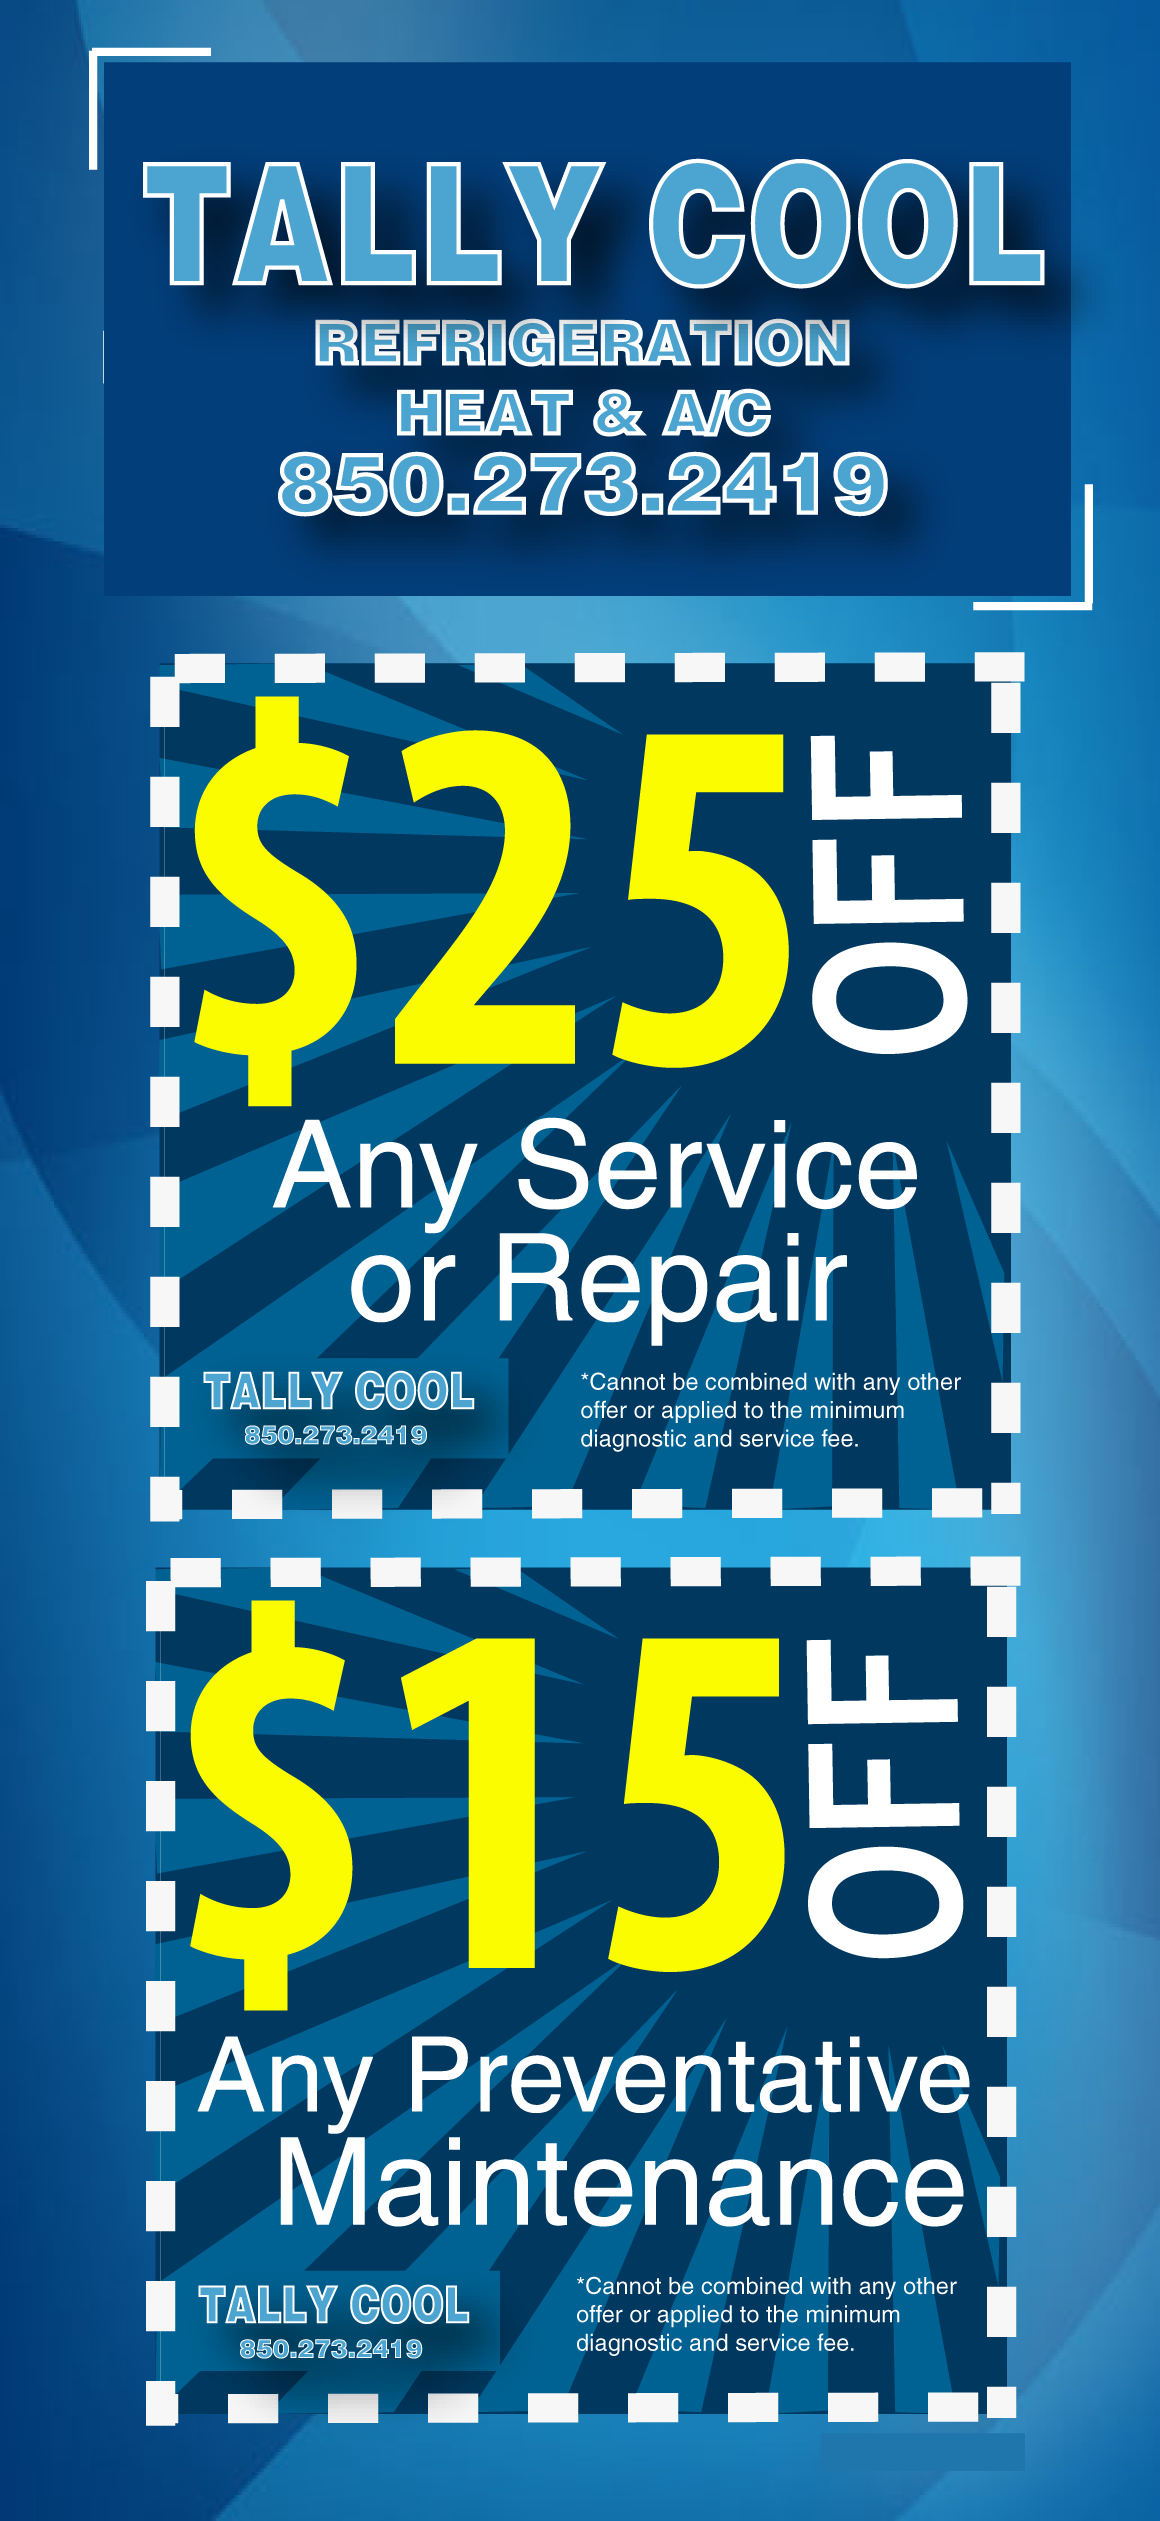 TALLYCOOL coupon 25 off service